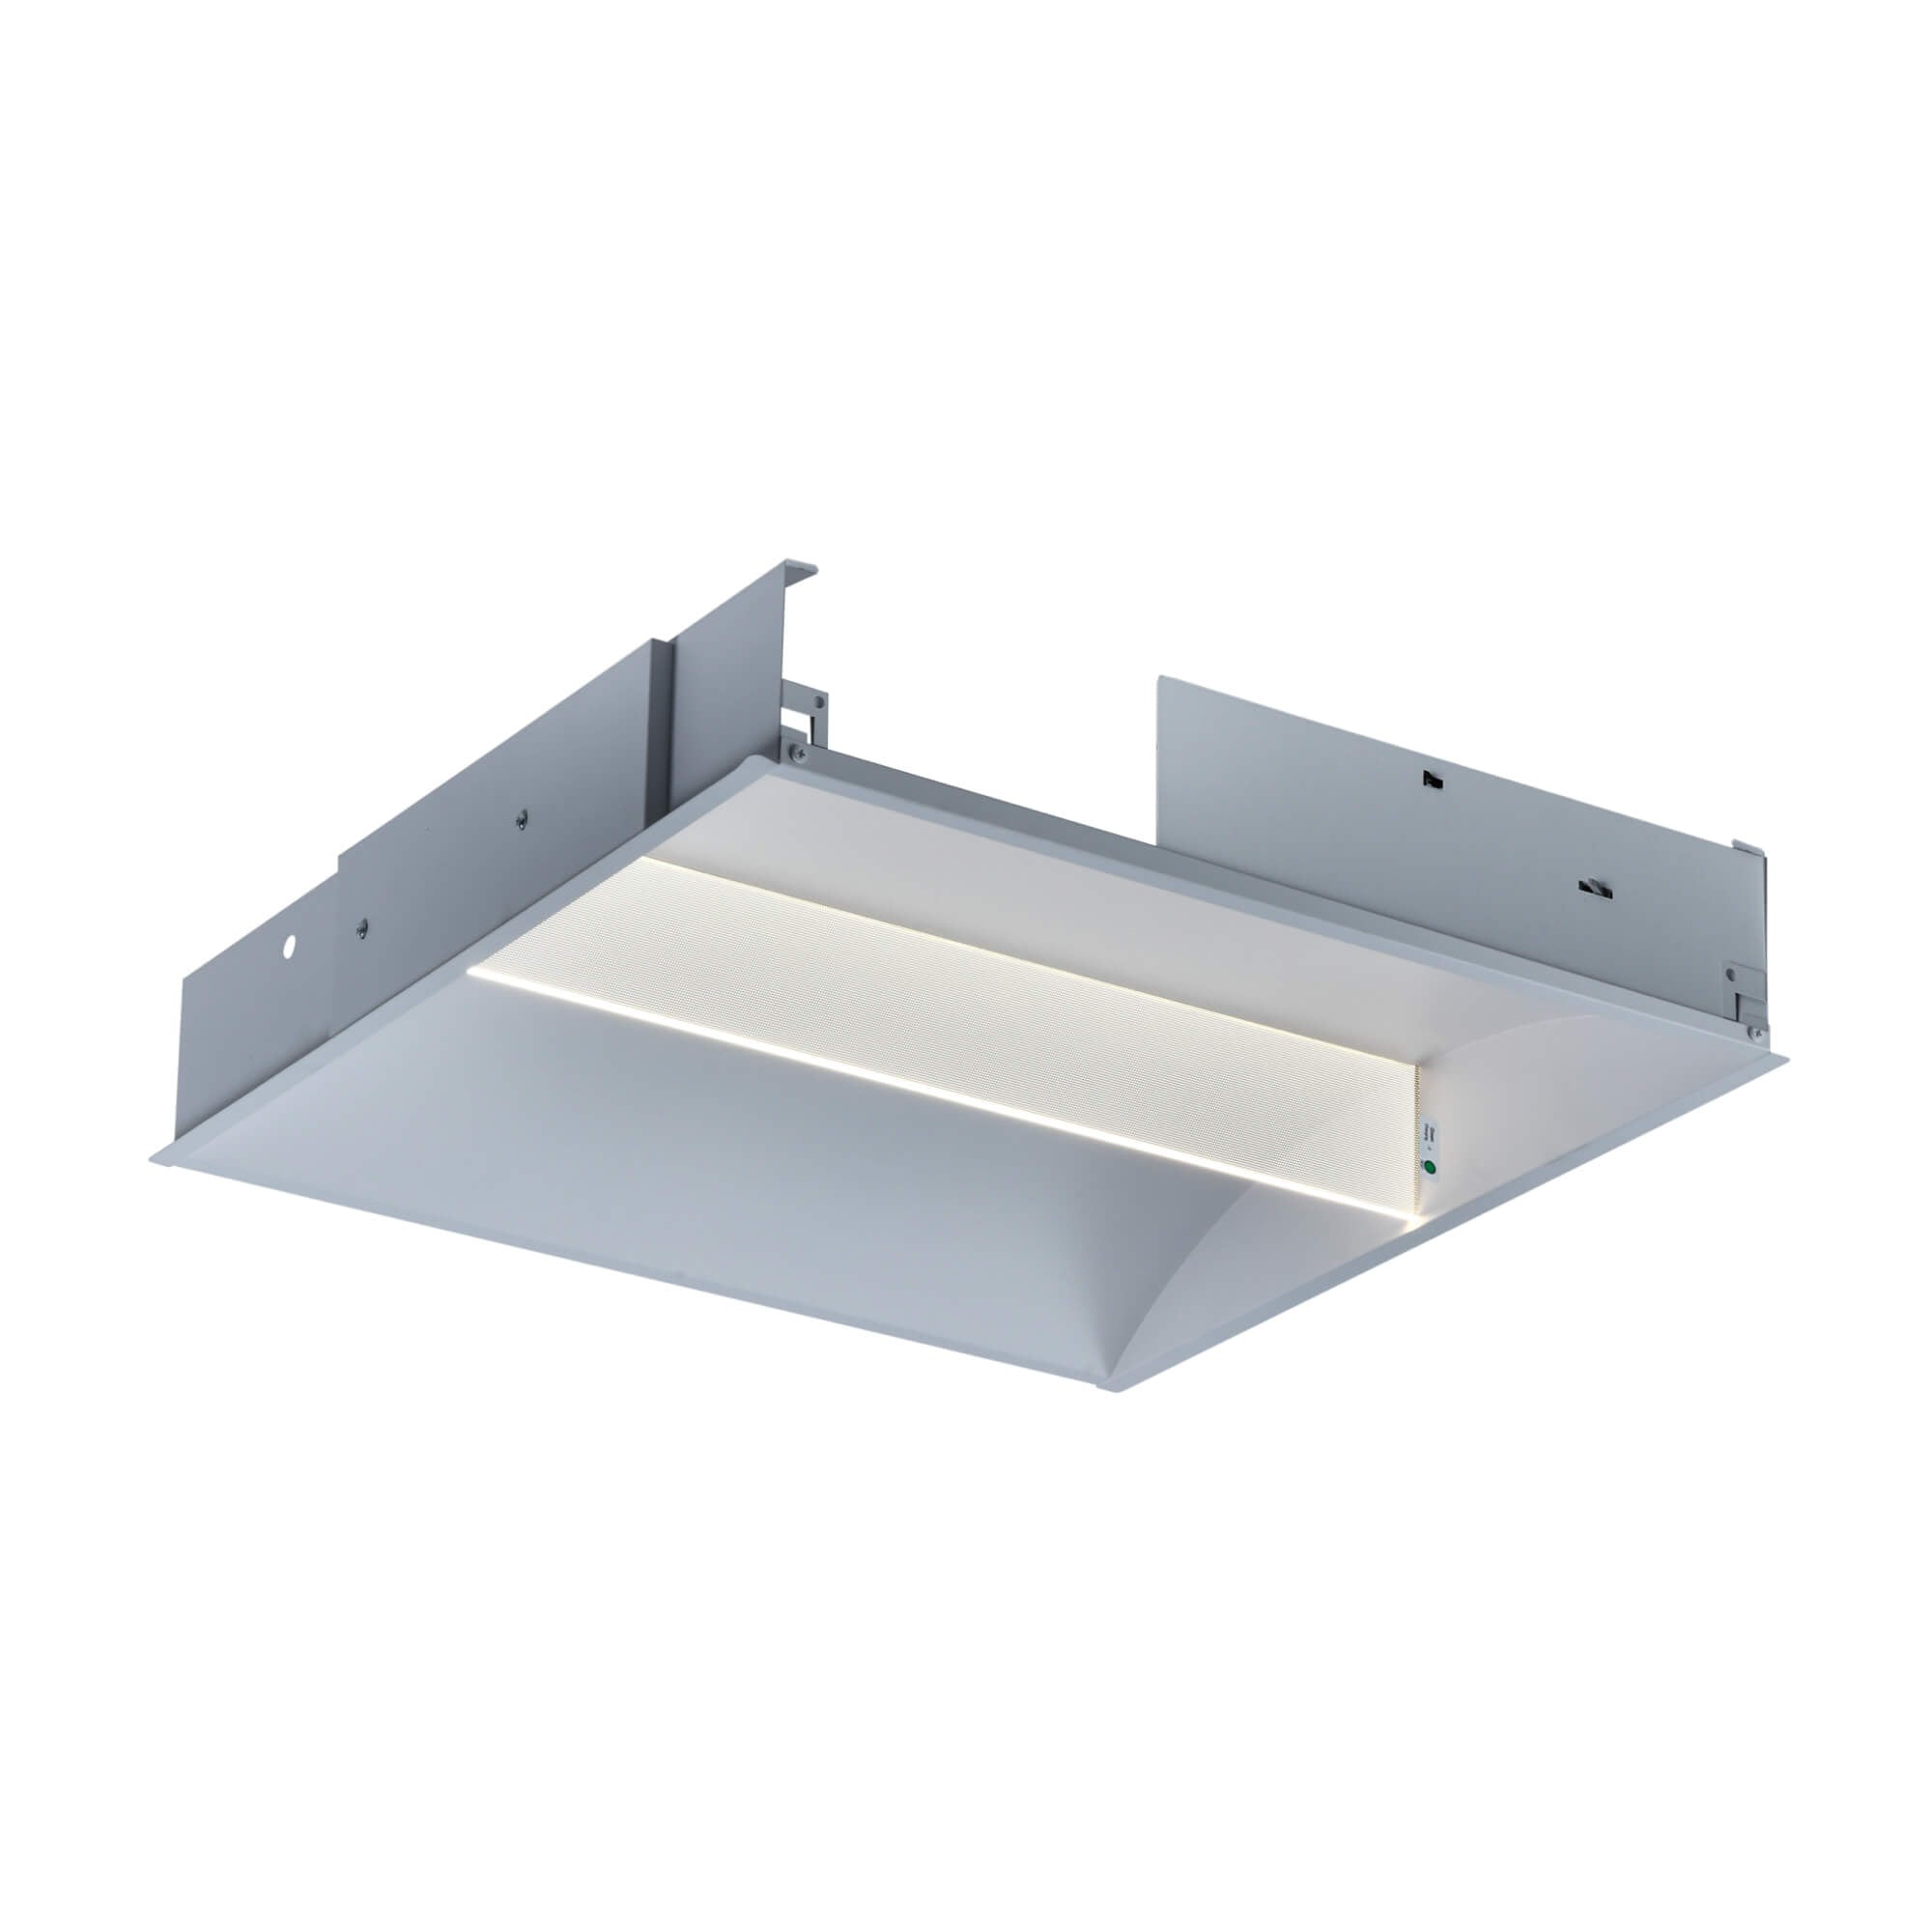 Halcon Indirect LED Troffer Light E1907 with Bluetooth Sensor and Emergency Control for energy-efficient lighting